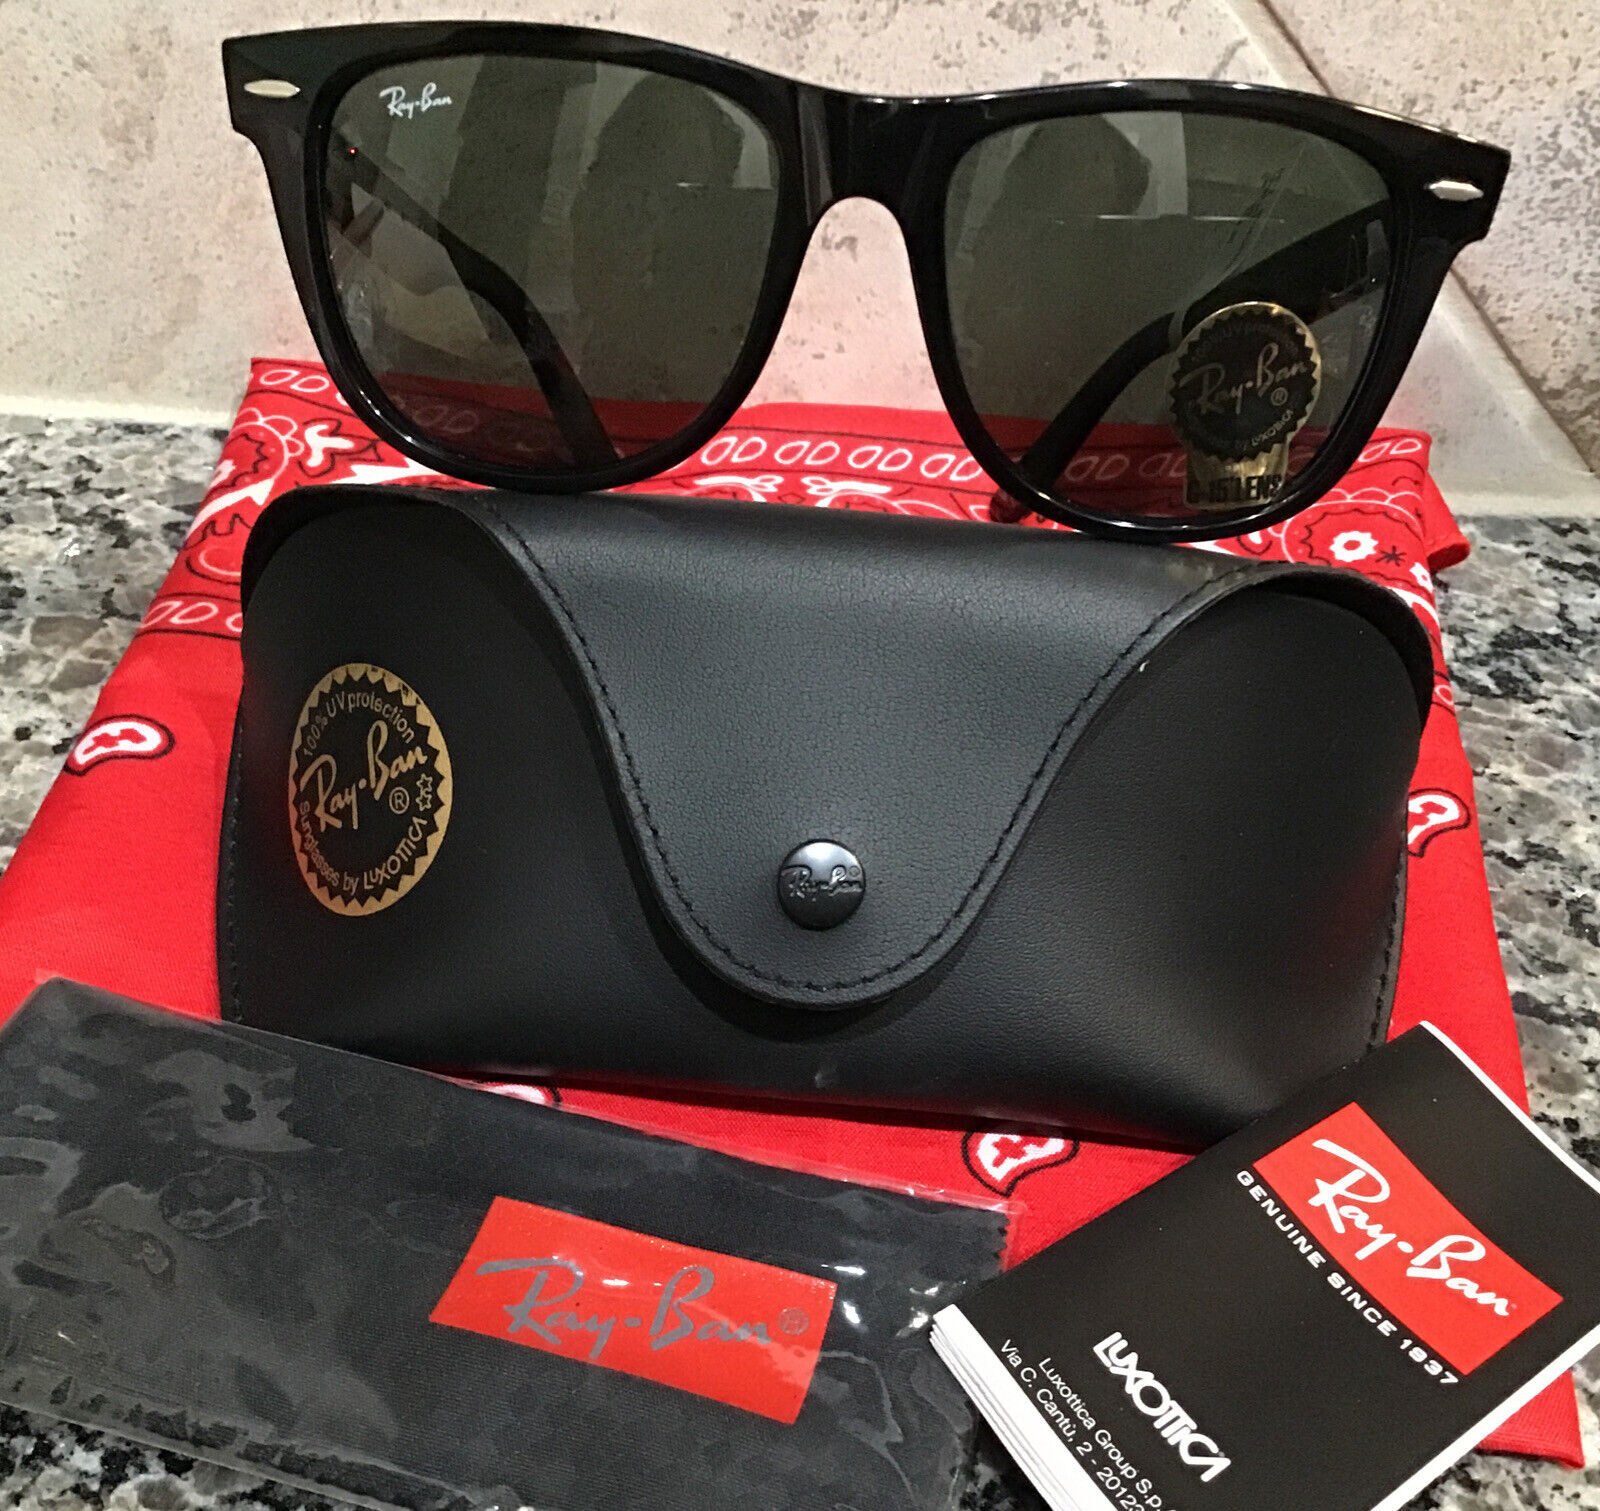 Ray Ban Rb2140 901 54 18 Unisex Sunglasses For Sale Online Ebay